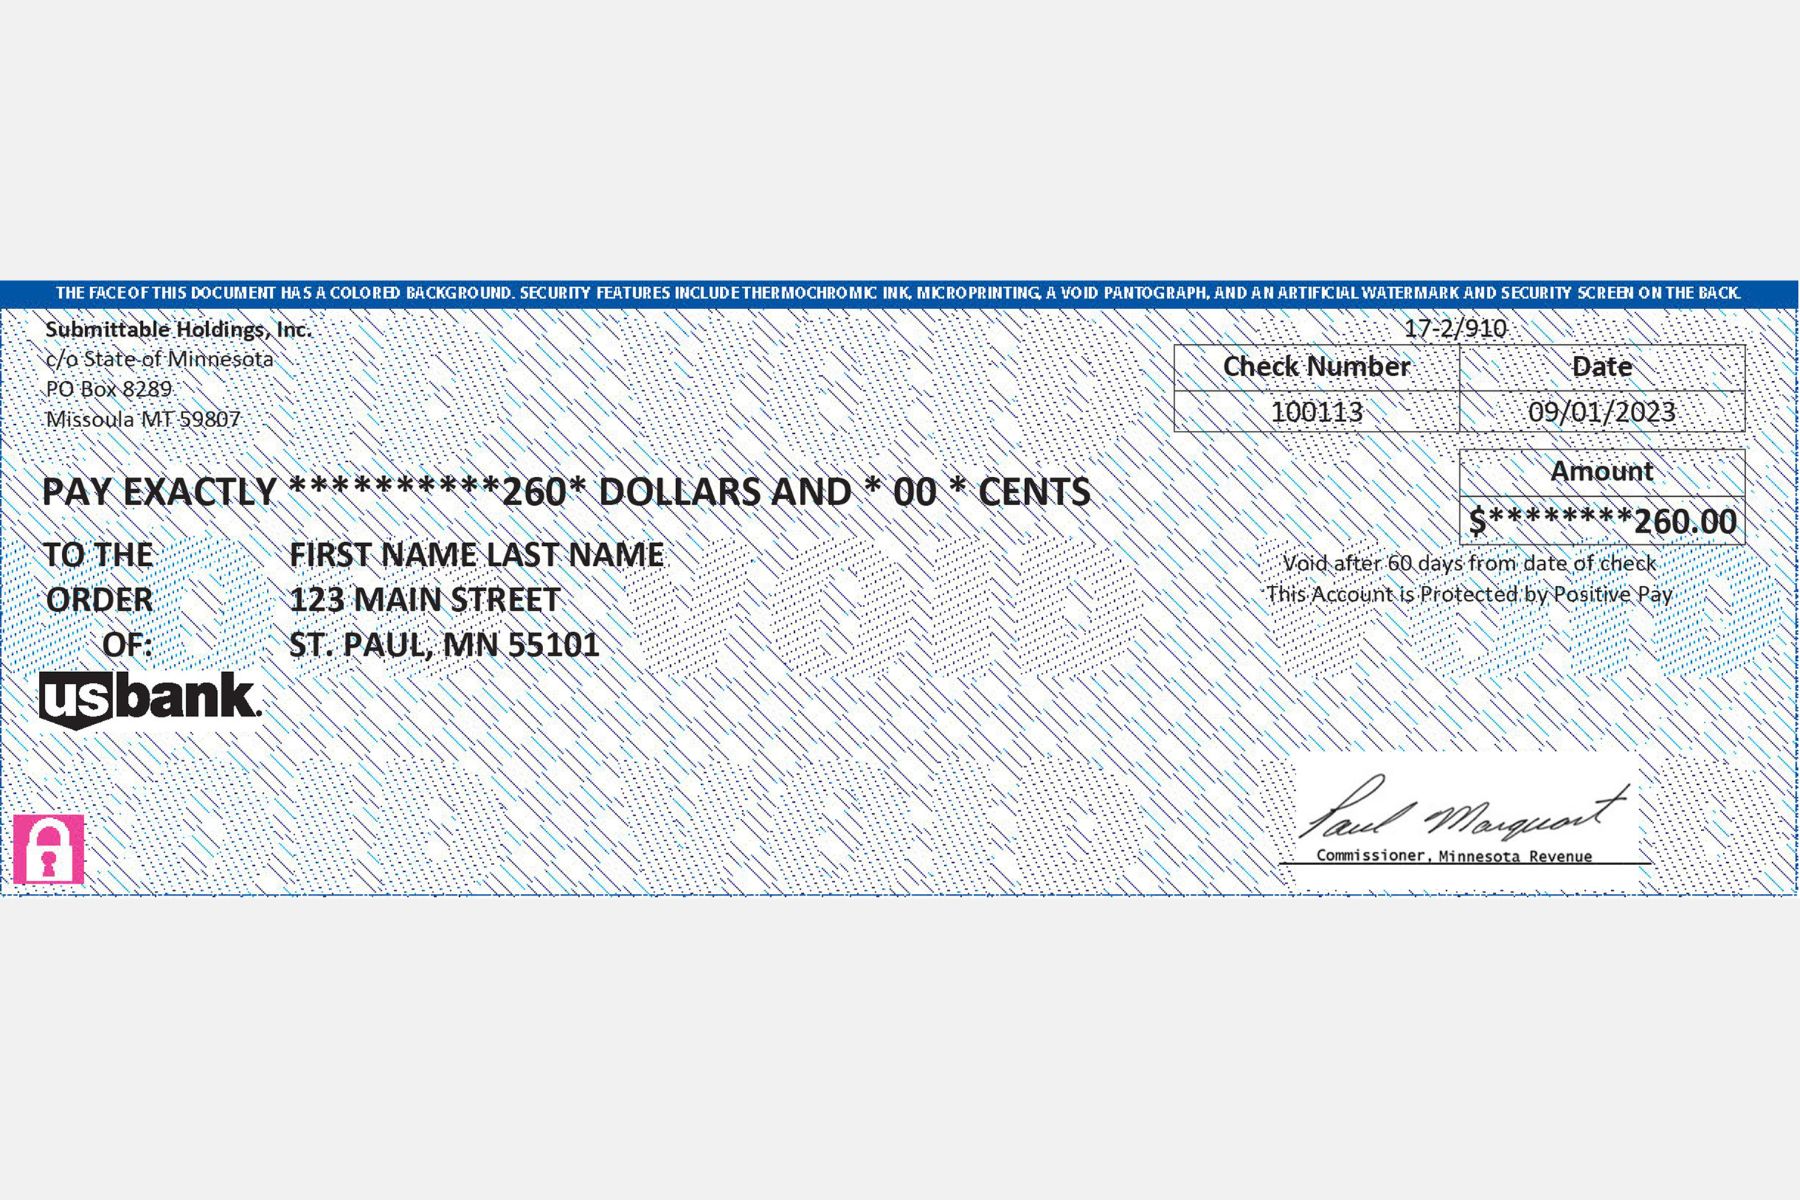 BCBS is sending out rebate checks. Find out why.